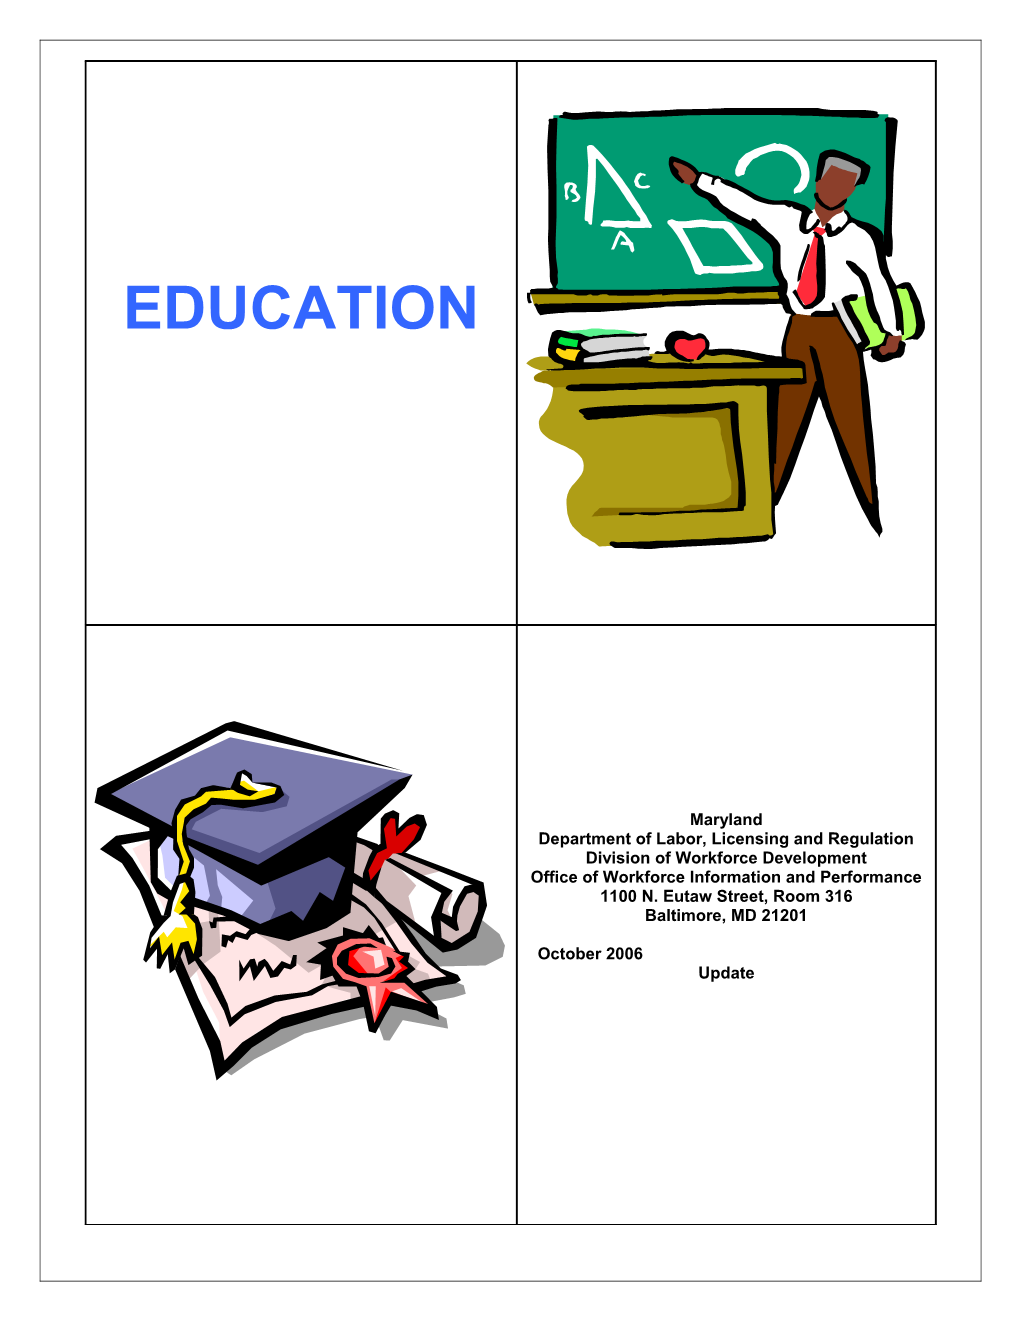 What Is Included in the Education Sector?